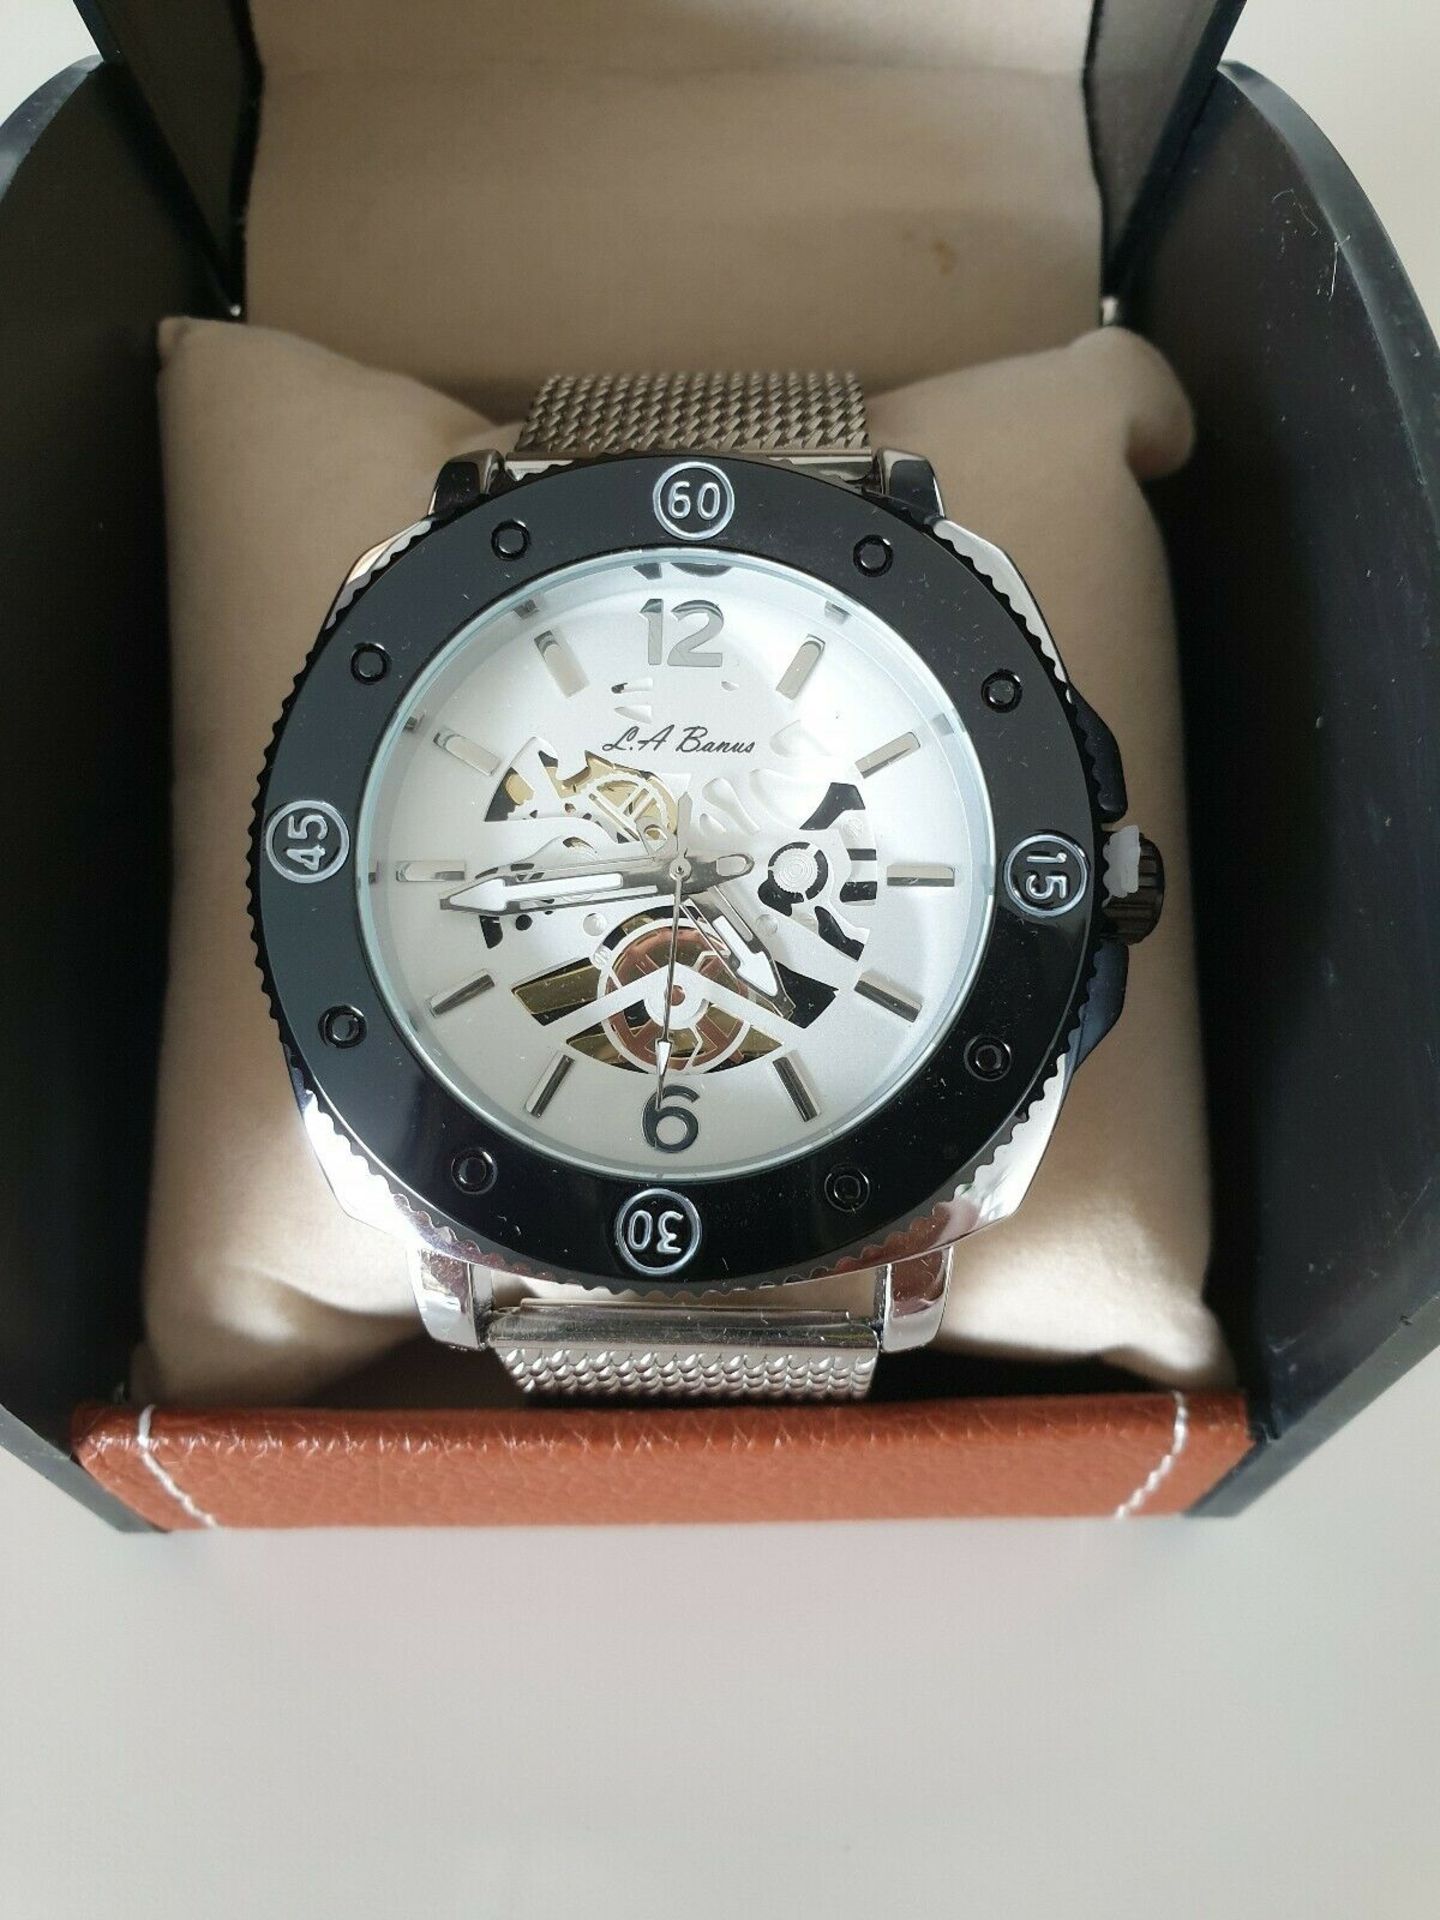 Men’s La Banus King Skeleton Watch With Stainless Steel Silver And Black Colour - Image 2 of 4